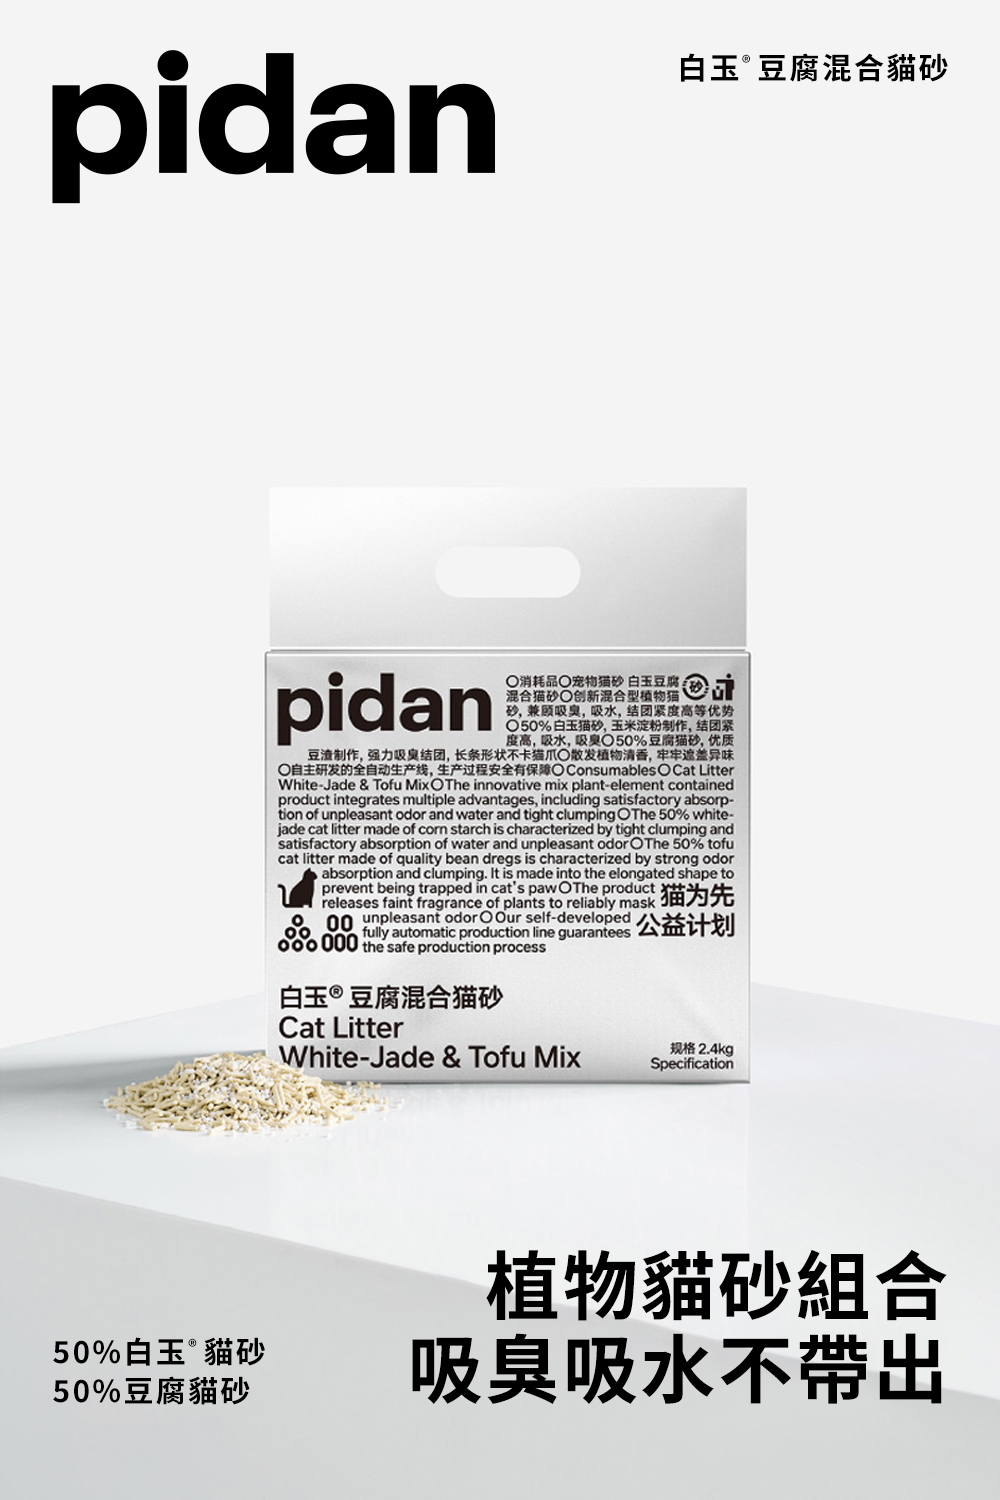 pidan白玉豆腐混合貓砂pidan消耗品宠物猫砂 白玉豆腐砂,兼顾吸,吸水,结团紧度高等优势50%白玉猫砂,玉米淀粉制作,结团紧度高,吸水,吸臭%豆腐猫砂,优质制作,强力吸臭结团,长条形状不卡猫爪植物清香,遮盖异味自主研发的全自动生产线,生产过程安全有保障 Consumables O Cat LitterWhite-Jade & Tofu MixOThe innovative mix plant-element containedproduct integrates multiple advantages, including satisfactory absorp-tion of unpleasant odor and water and tight clumping OThe 50% white-jade cat litter made of  starch is characterized by tight clumping andsatisfactory absorption of water and unpleasant odor OThe 50% tofucat litter made of quality bean dregs is characterized by strong odorabsorption and clumping. It is made into the elongated shape toprevent being trapped in cats pawOThe productreleases faint fragrance of plants to reliably m00unpleasant odor O Our self-developed 000 the safe production processfully automatic production line guarantees 公益计划白玉豆腐混合猫砂Cat LitterWhite-Jade & Tofu Mix规格 2.4kgSpecification50%白玉®貓砂50%豆腐貓砂植物貓砂組合吸臭吸水不帶出